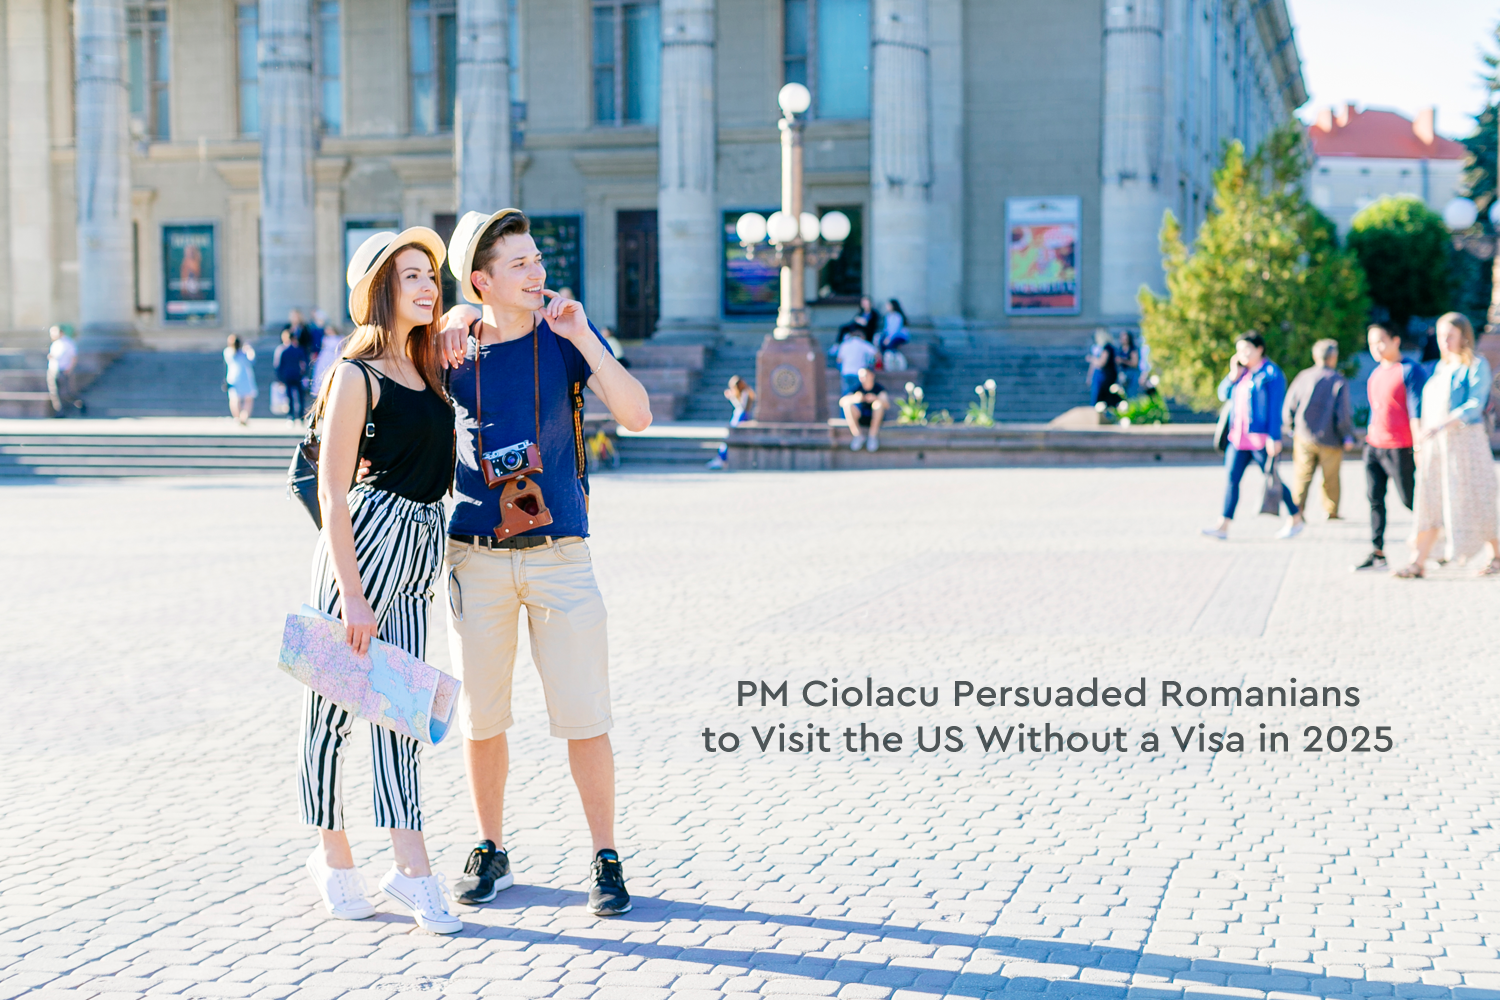 PM Ciolacu Persuaded Romanians to Visit the US Without a Visa in 2025.